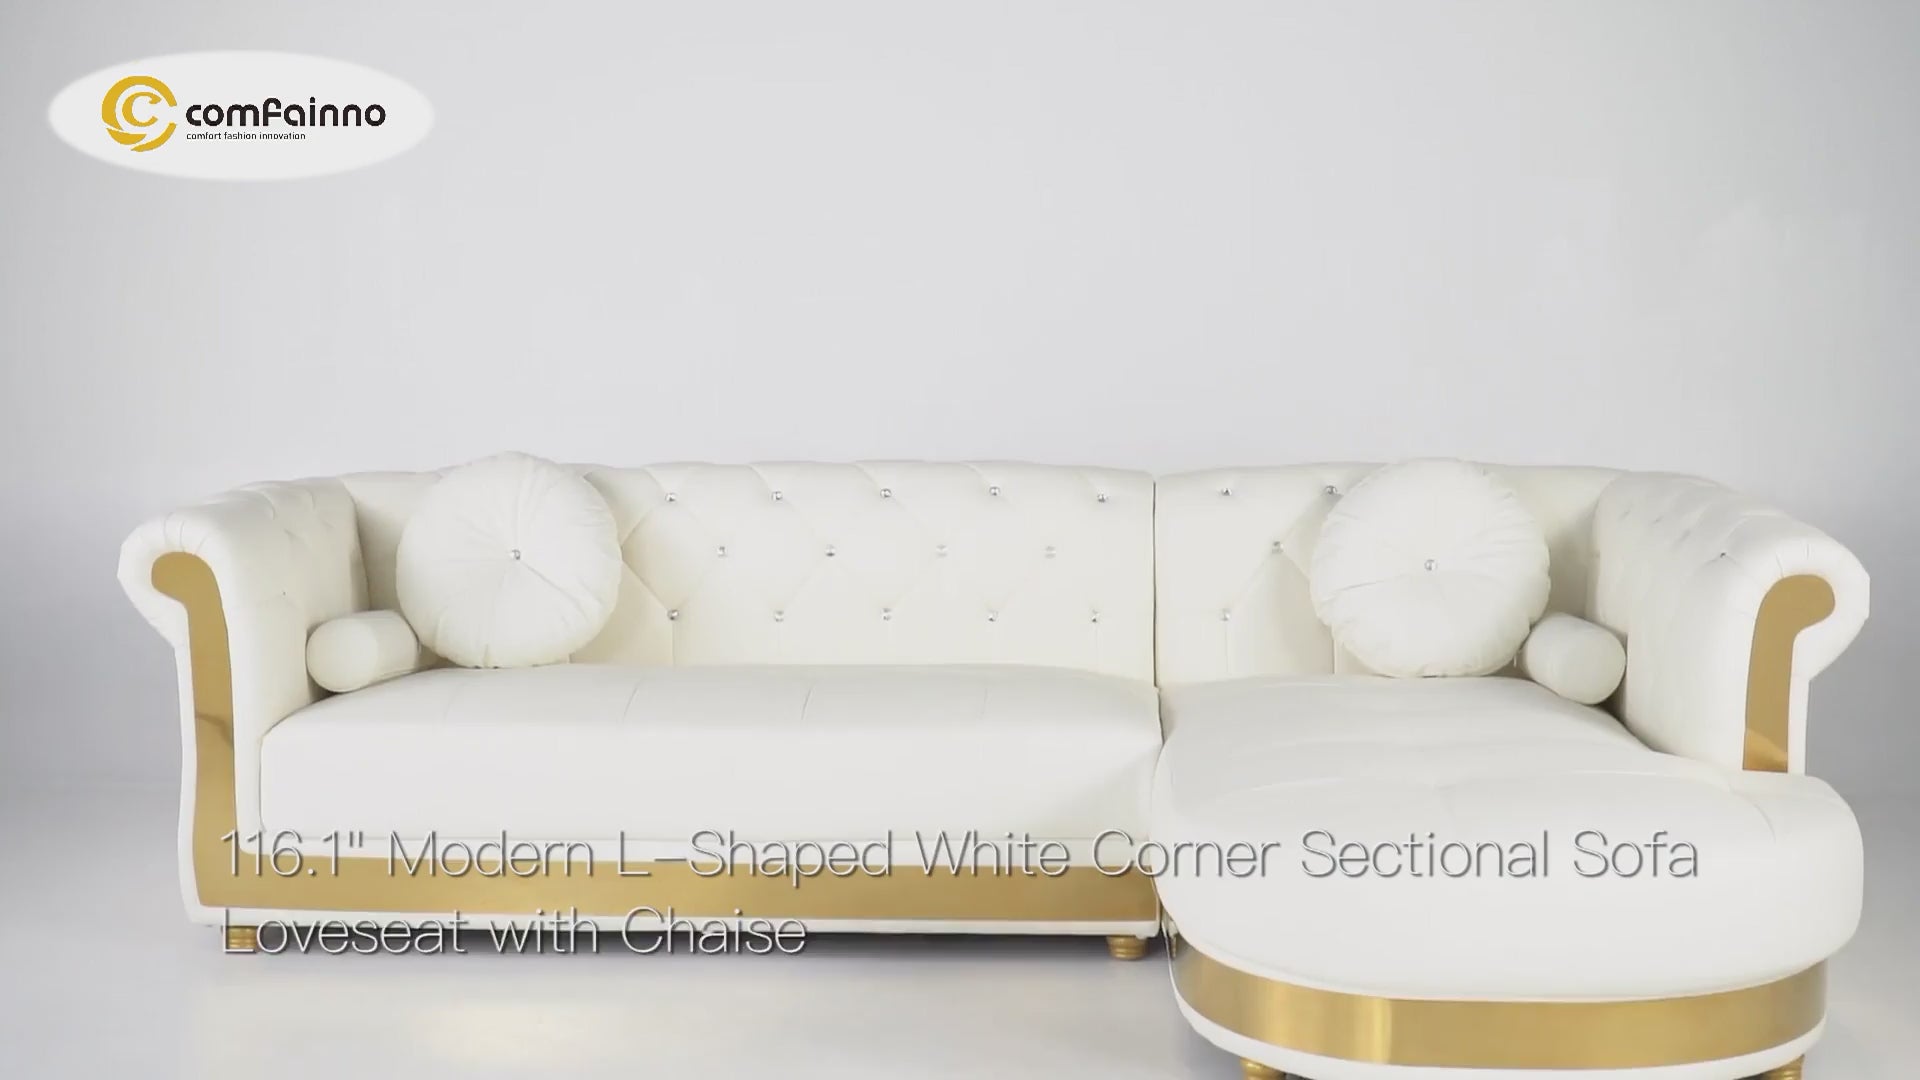 Dodiy Modern L-Shaped White Corner Sectional Sofa 5-Seater Loveseat with Chaise Pillows Left-Hand Facing